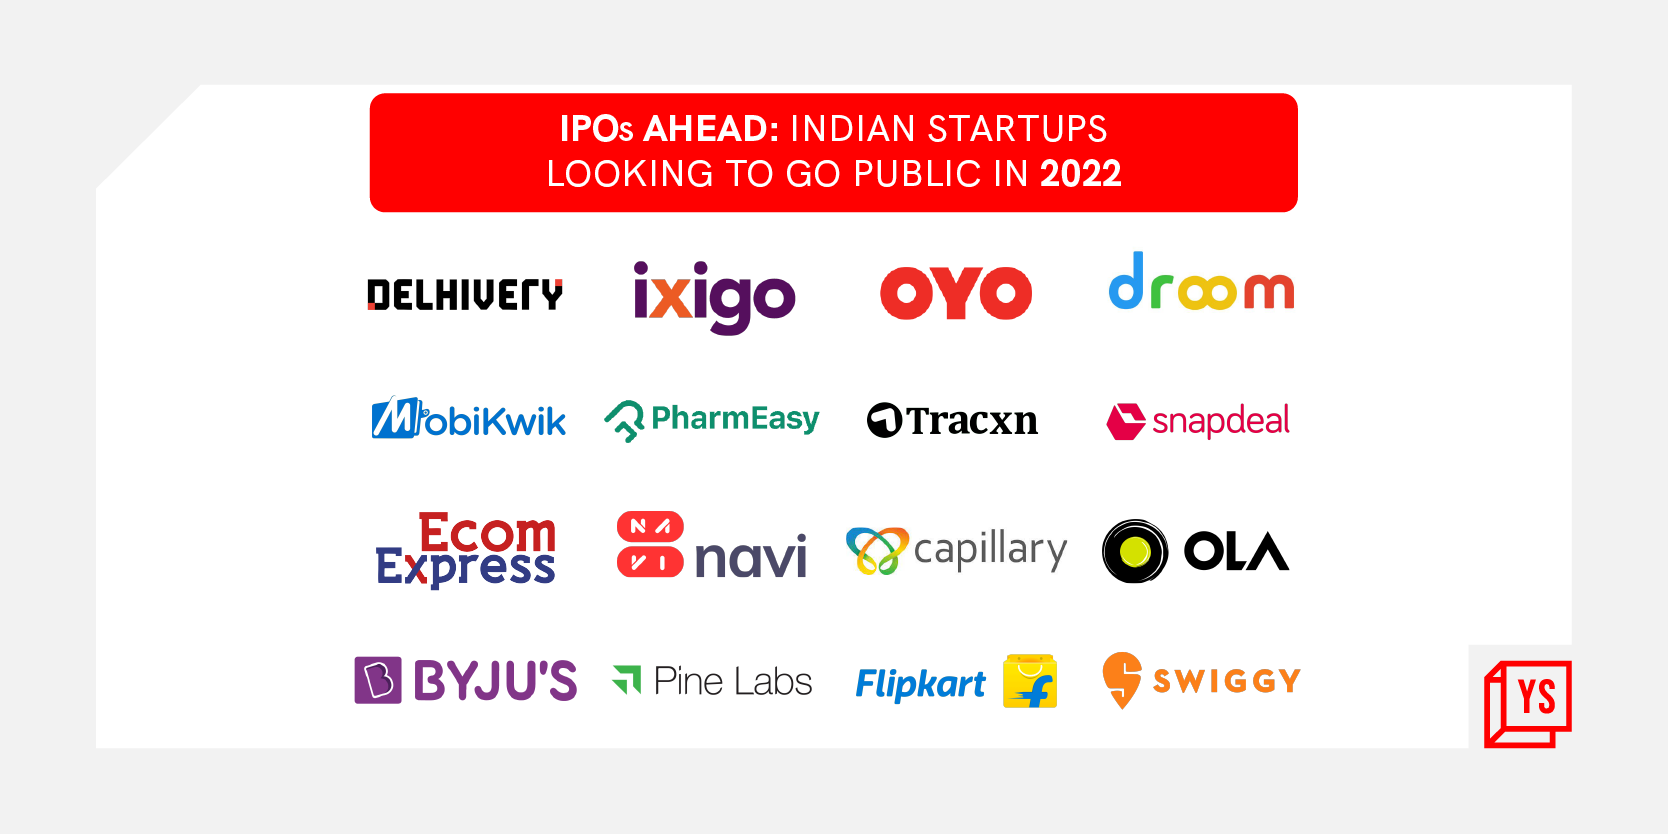 Here’s a list of Indian startups planning to go the IPO route in 2022